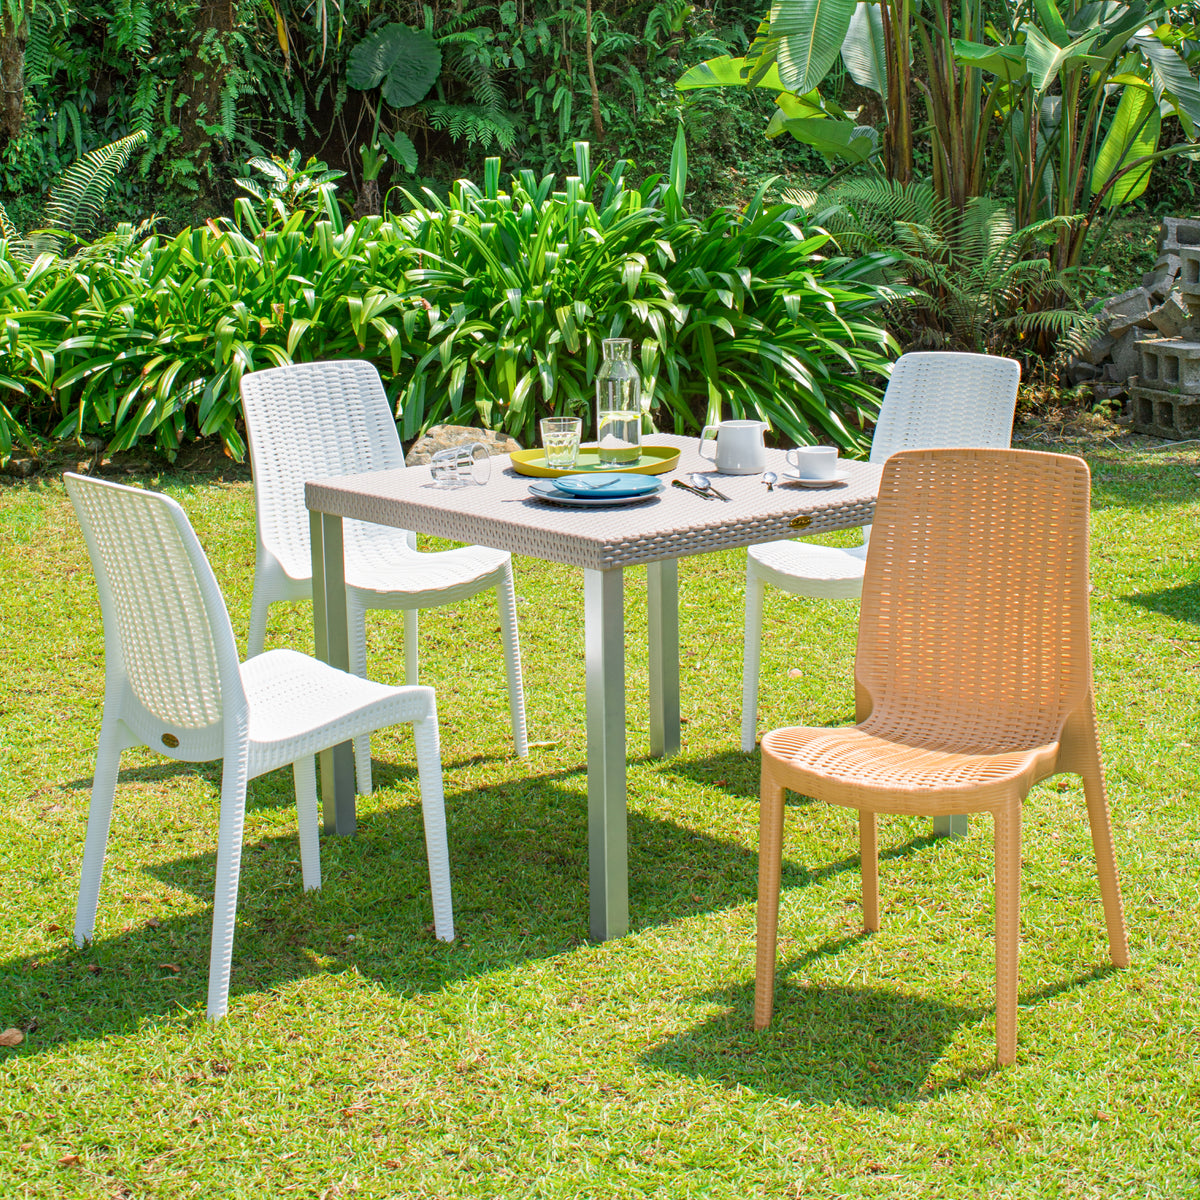 Lagoon RUE 7025 Stackable Rattan Dining Chair - 4 pcs / set